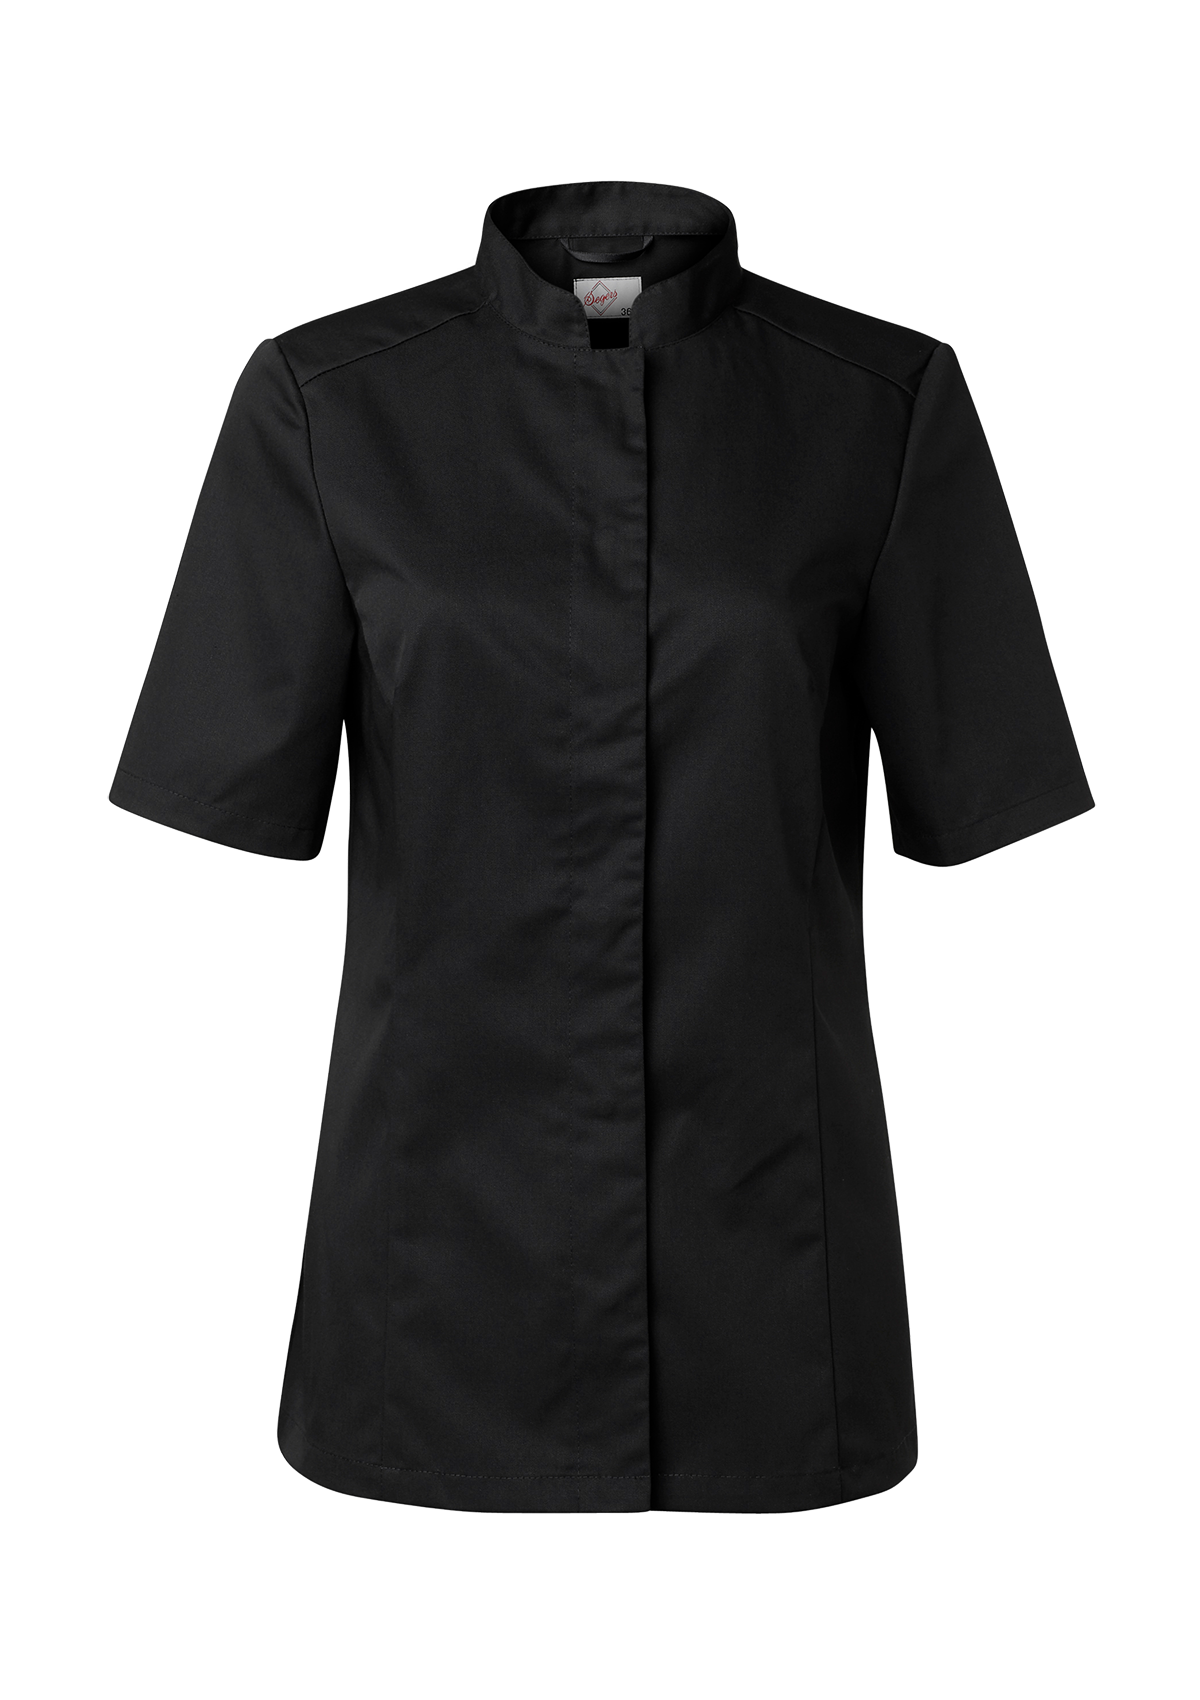 Women's chef shirt in slimmer fit shirt with short sleeves. Segers | Cookniche